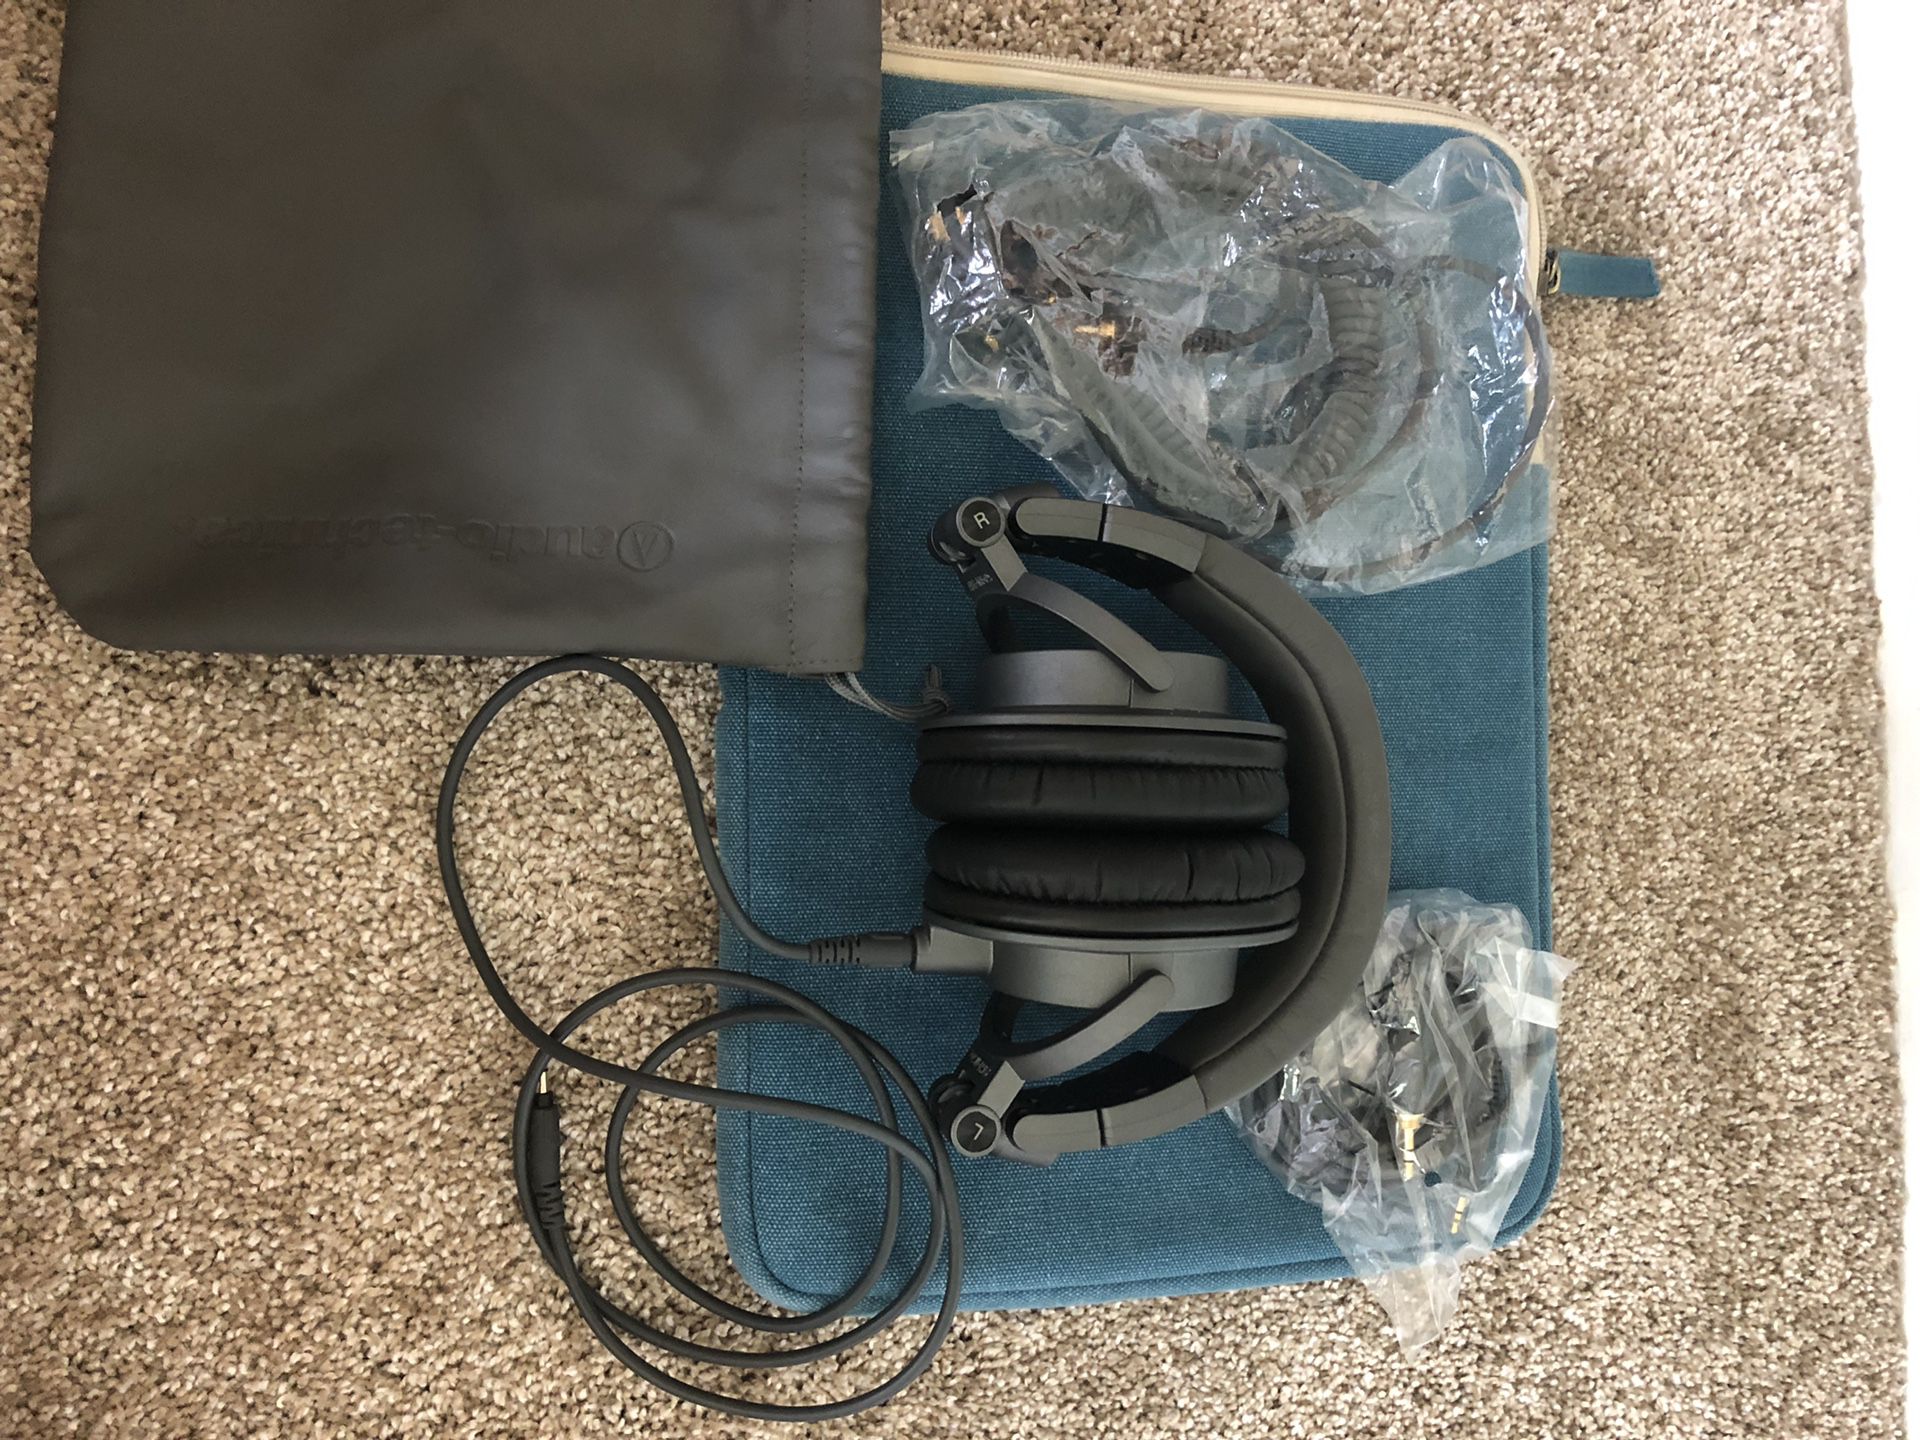 Audio Technica ATH-M50xMG- Limited Edition Matte Grey Headphones($135 OBO, willing to negotiate)